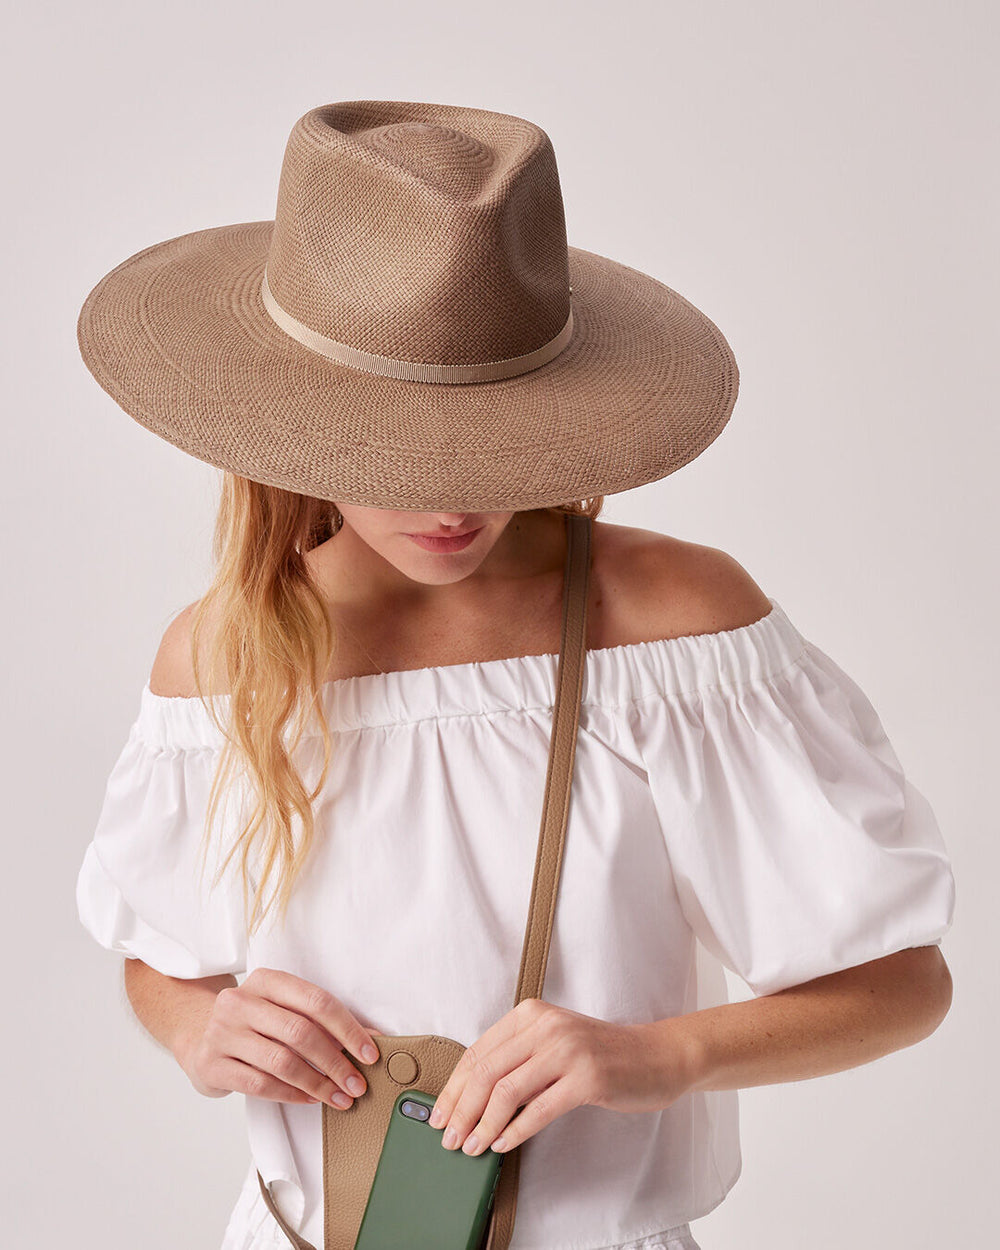 Woman in wide-brimmed hat holding a purse, looking down